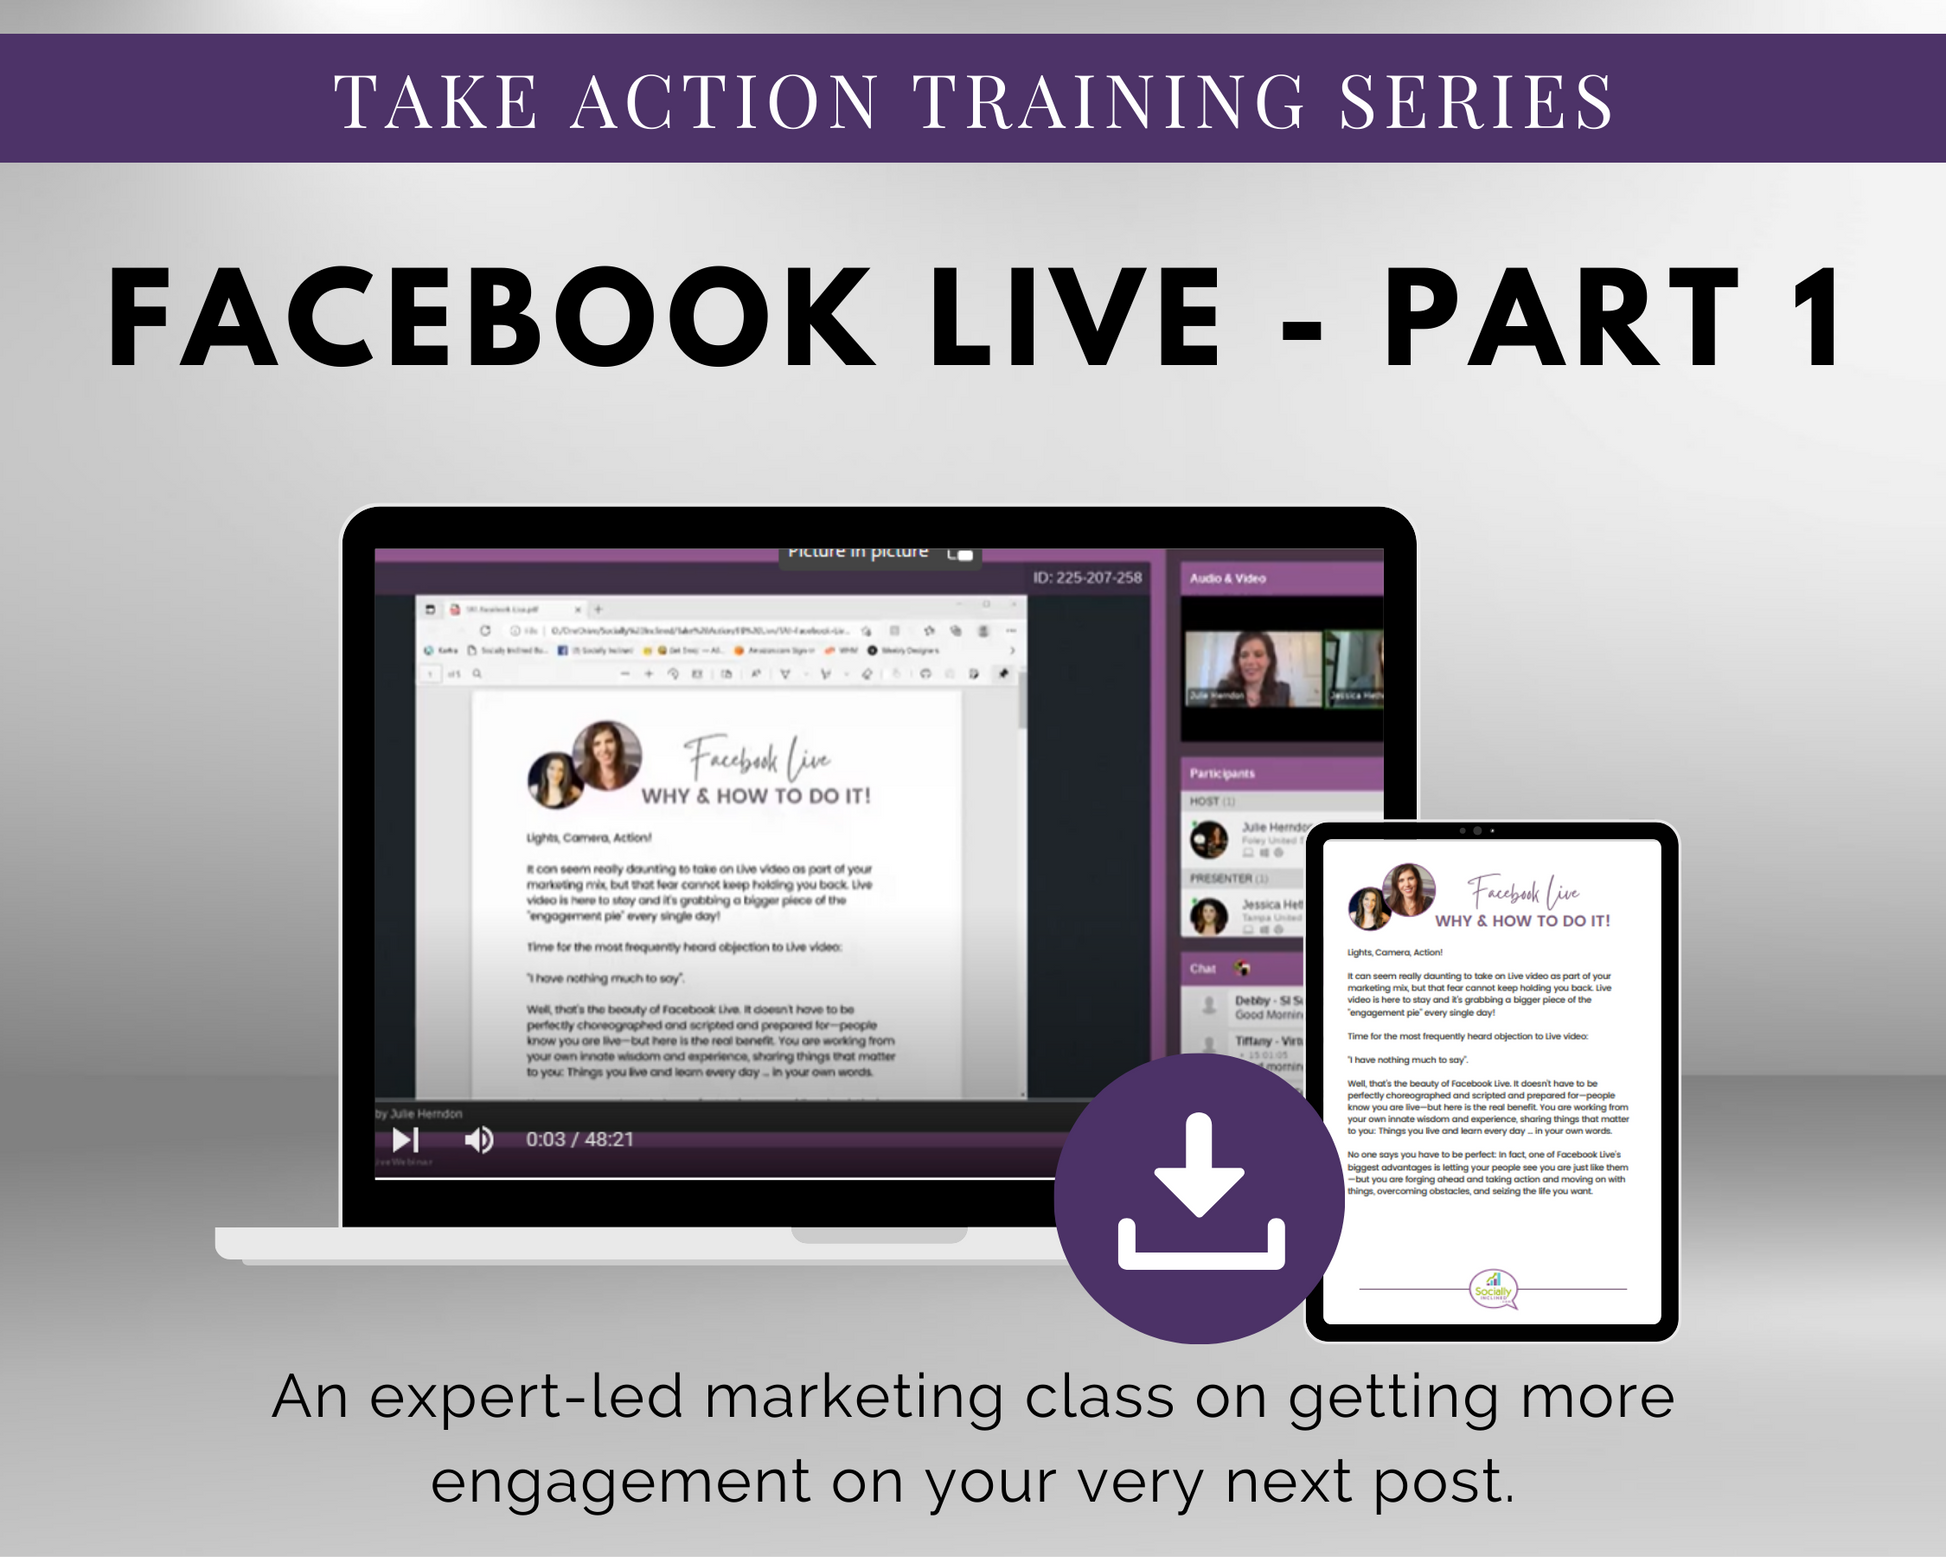 Take action training series TAT - Facebook Live - Part 1 Masterclass, brought to you by Get Socially Inclined.